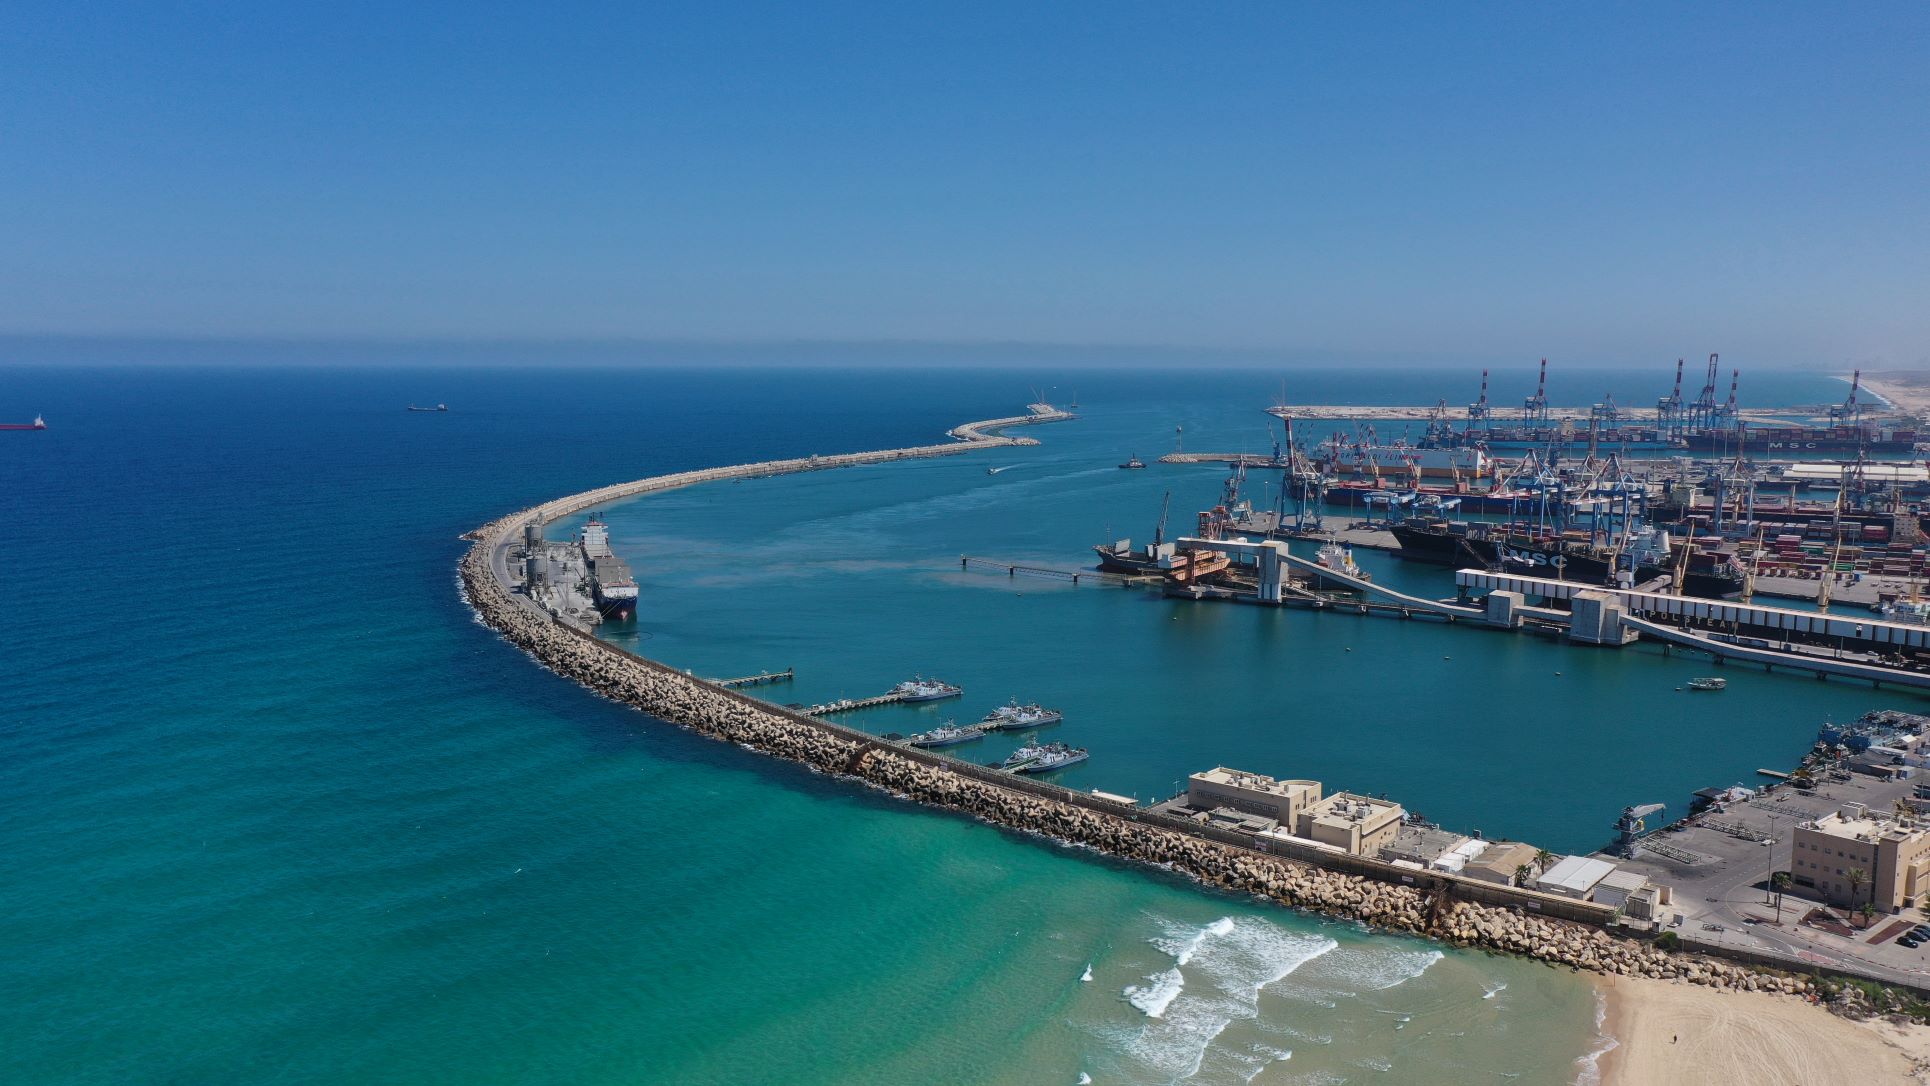 The port supports the development of start-ups from the concept phase, providing them with the infrastructure and optimal conditions to turn their idea into a scalable product. (GettyImages)